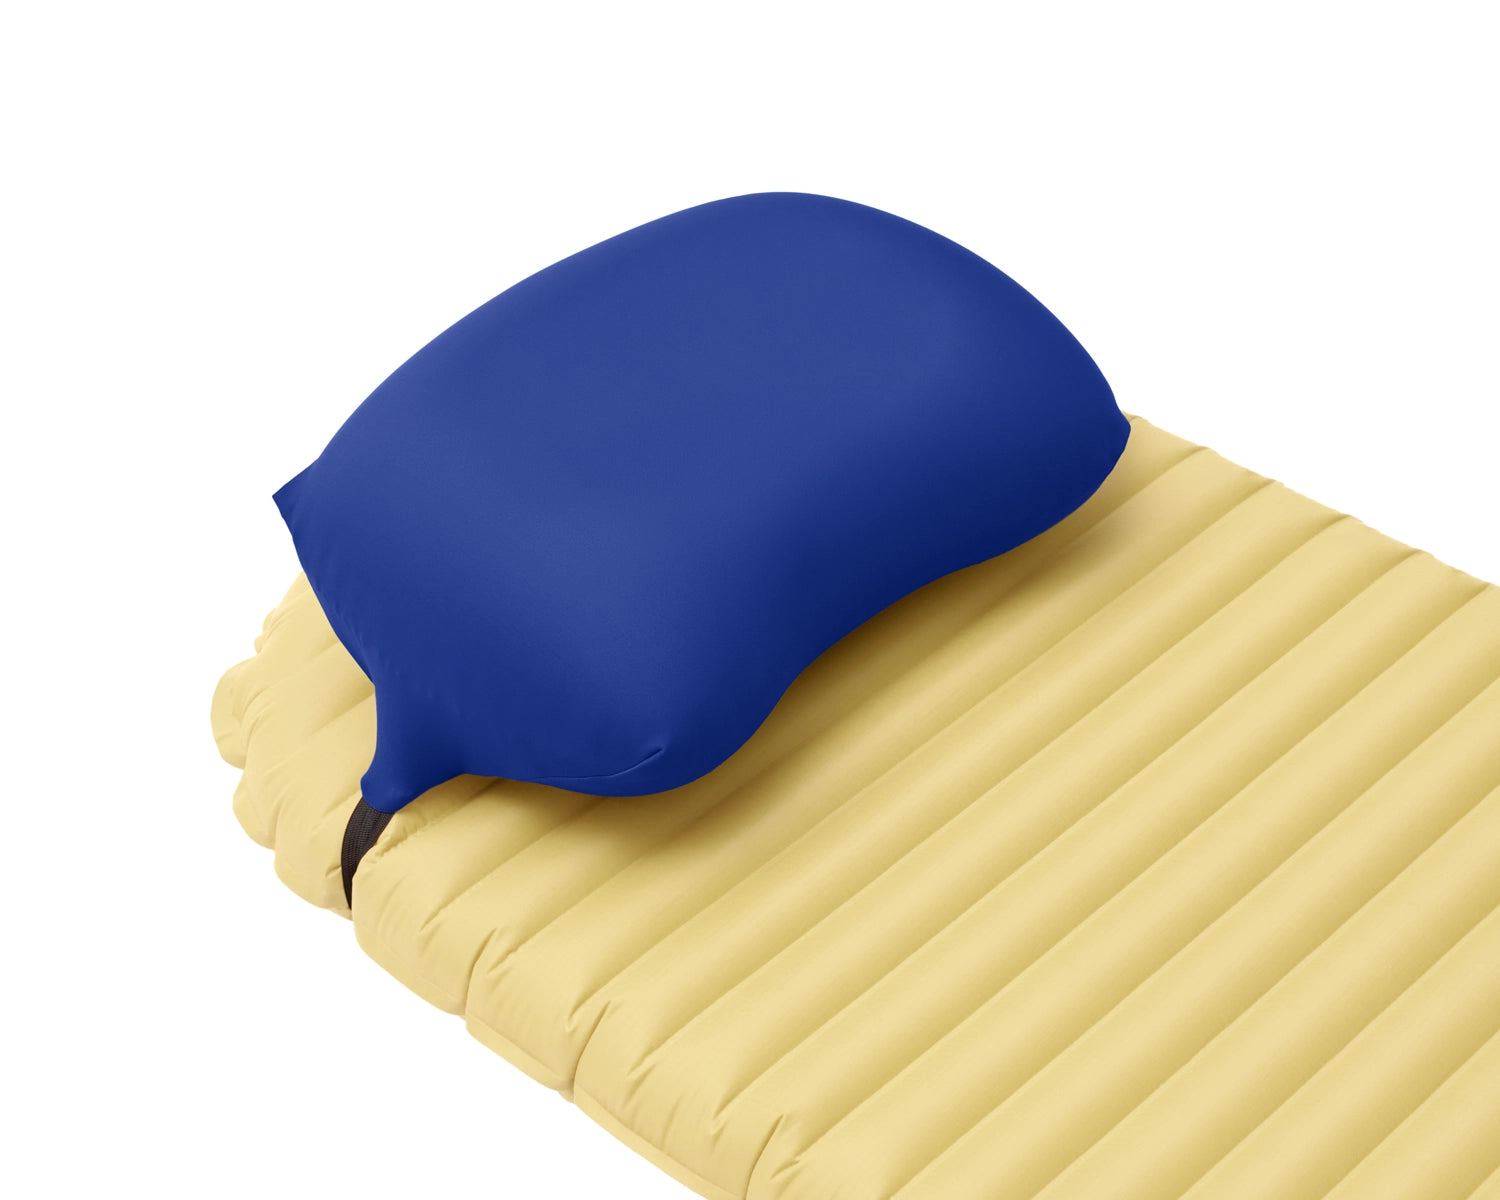 Pillow Strap small in blue side view. Backpacking pillowcase for attaching to a sleeping pad for better sleep camping.